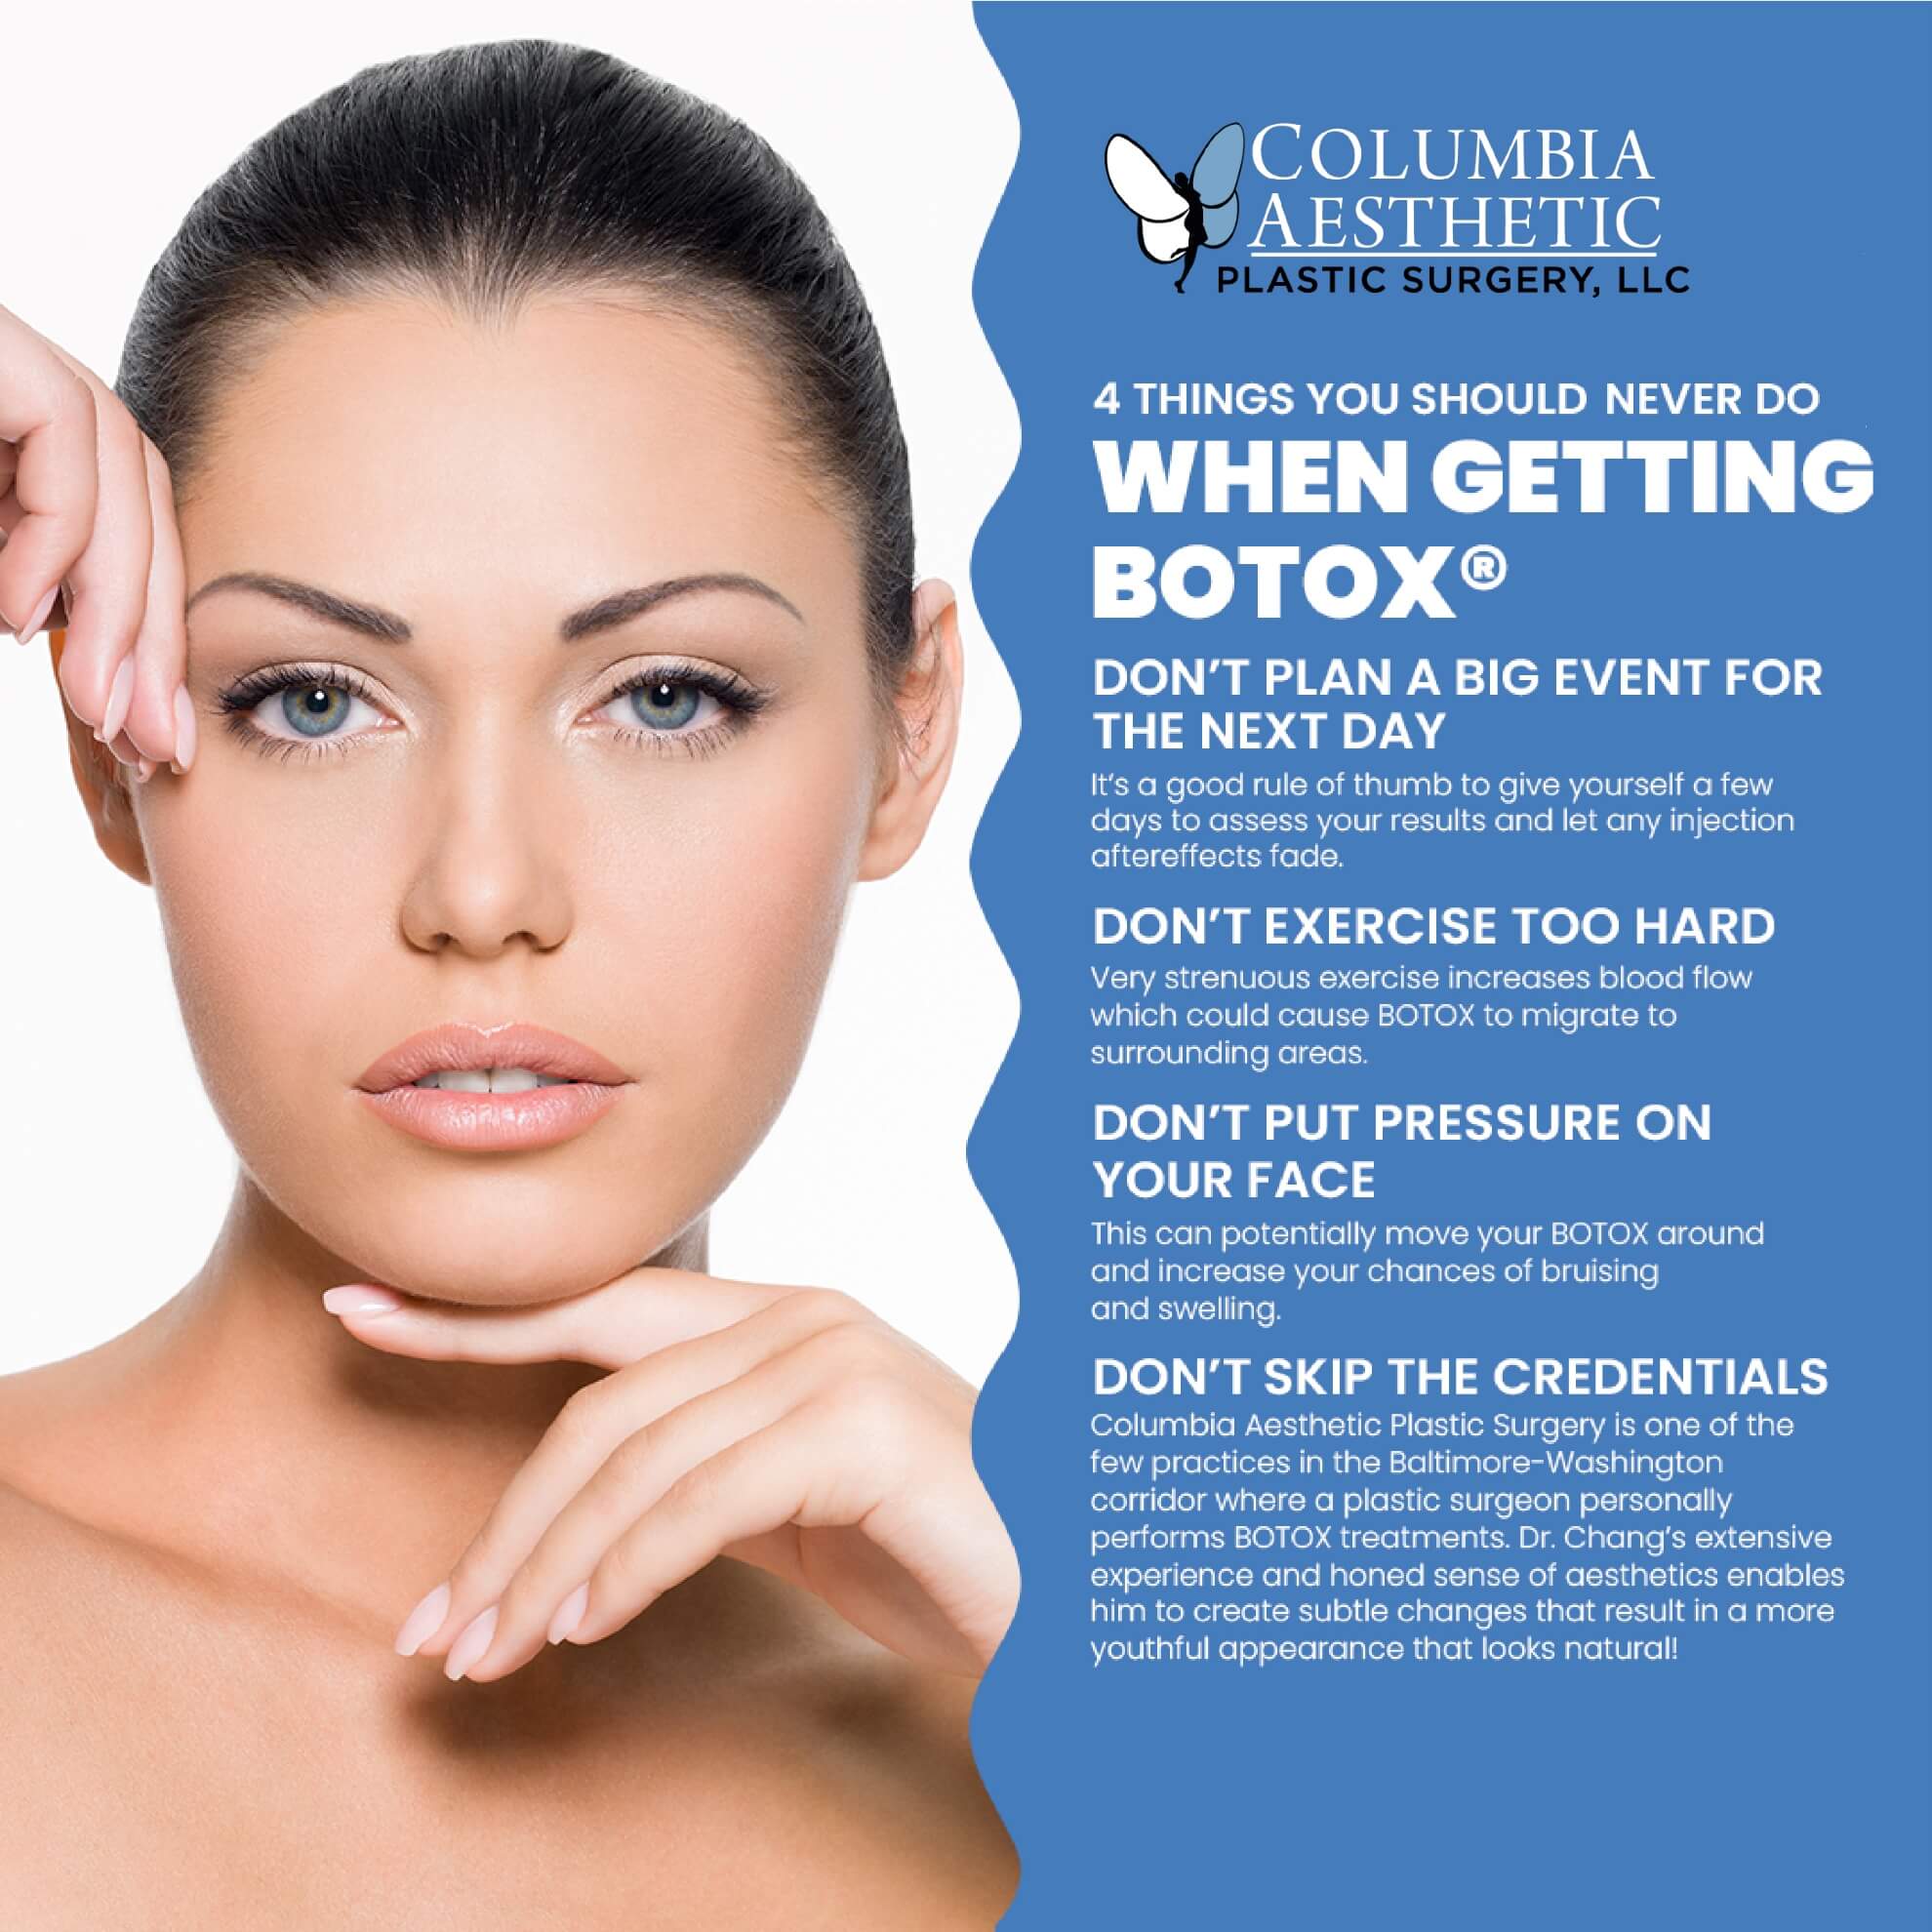 4 Things You Should Never Do When Getting BOTOX®